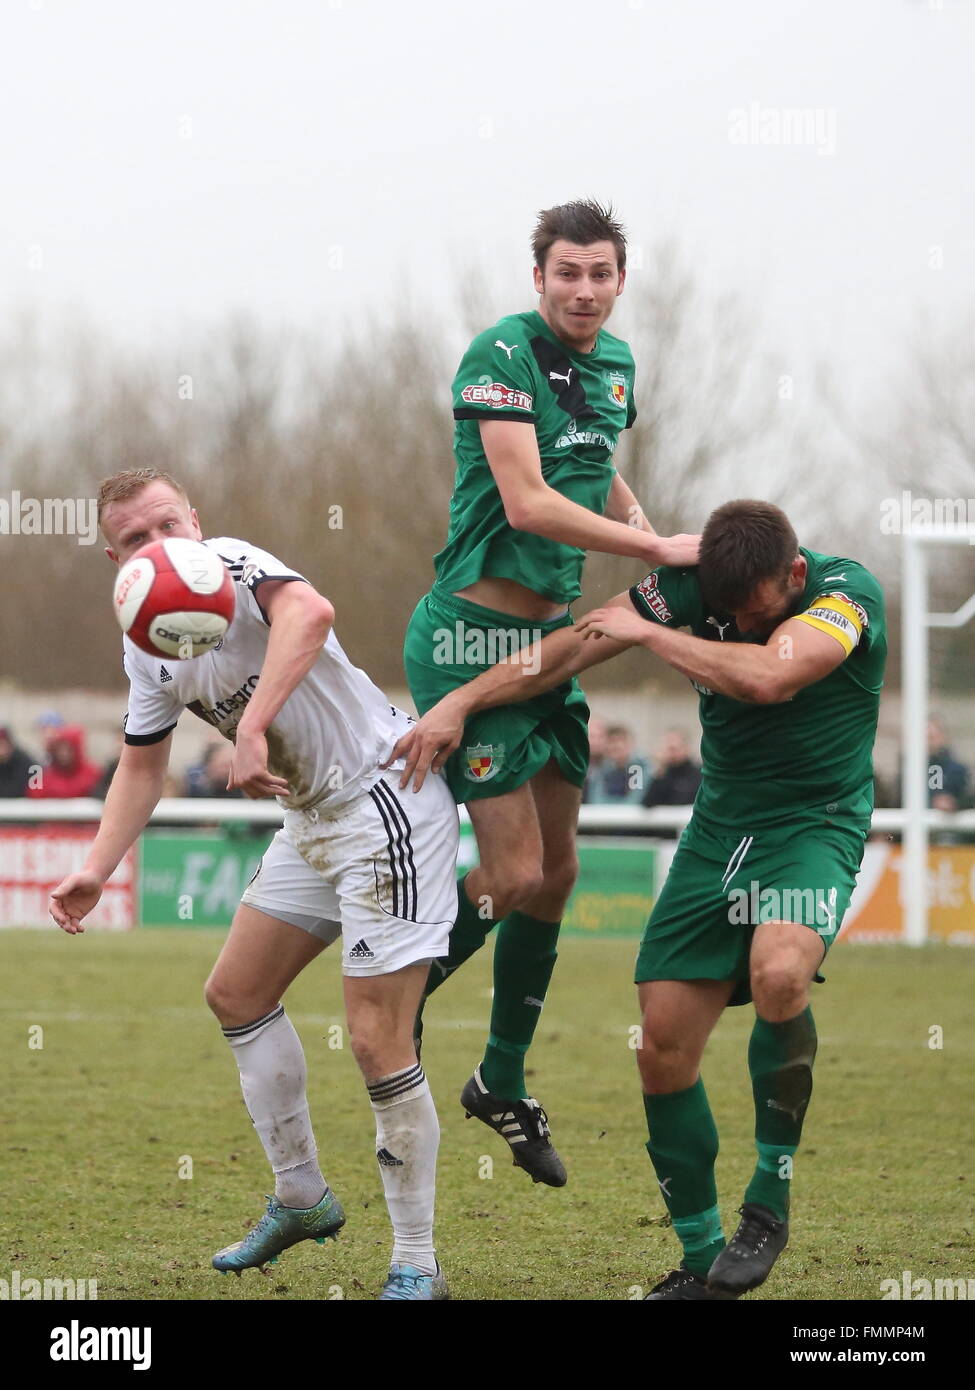 Nantwich, Cheshire. UK. 12th March, 2016. Nantwich Town lost 4-2 at home to FC Halifax Town in front of a crowd of 2078 in the FA Trophy Semi-Final 1st leg. Nantwich Town's Ben Harrison and captain Sam Hall in action. Credit:  Simon Newbury/Alamy Live News Stock Photo